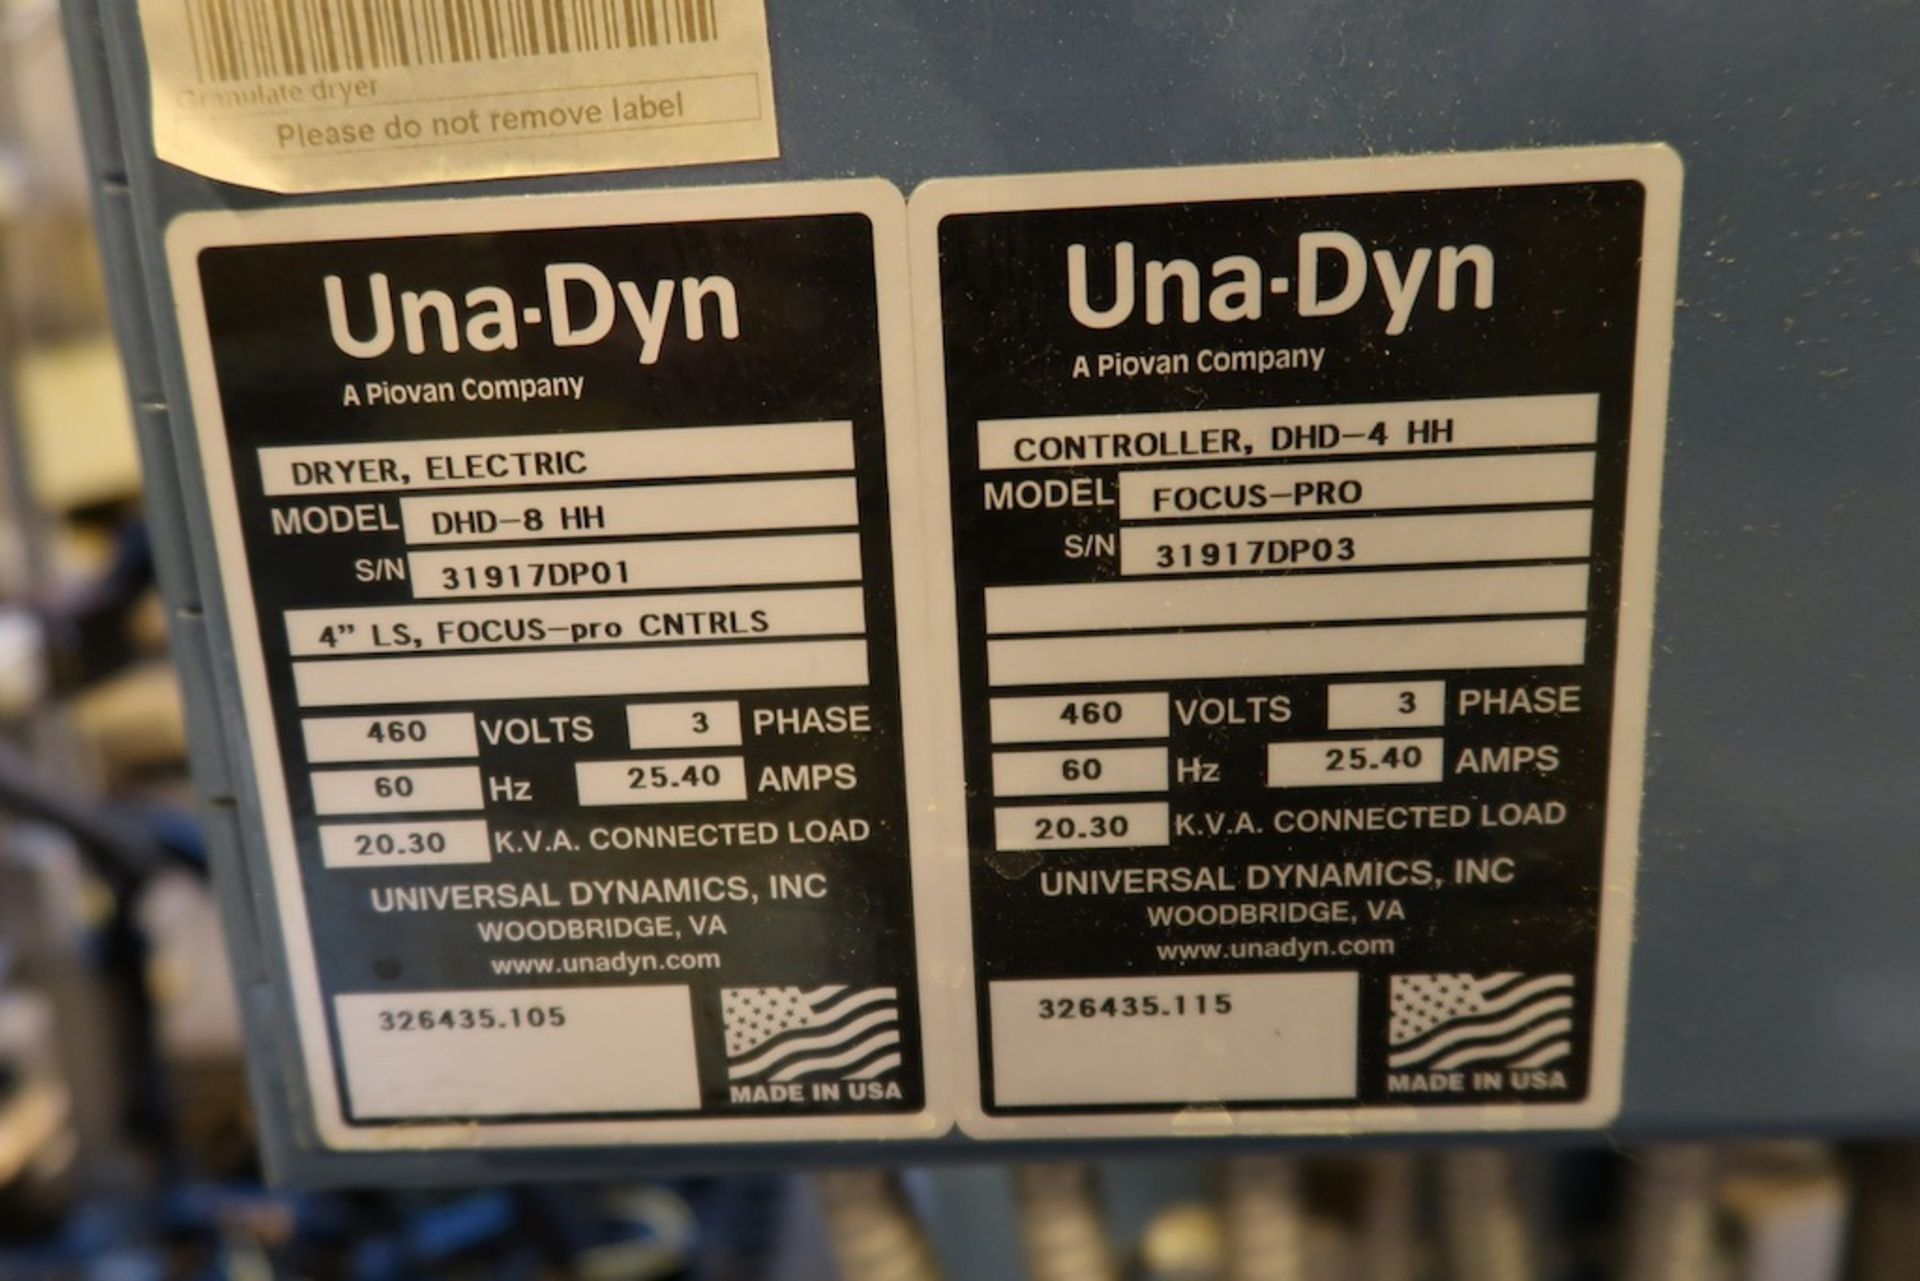 Una-Dyn Electric Material Dryer - Image 4 of 4